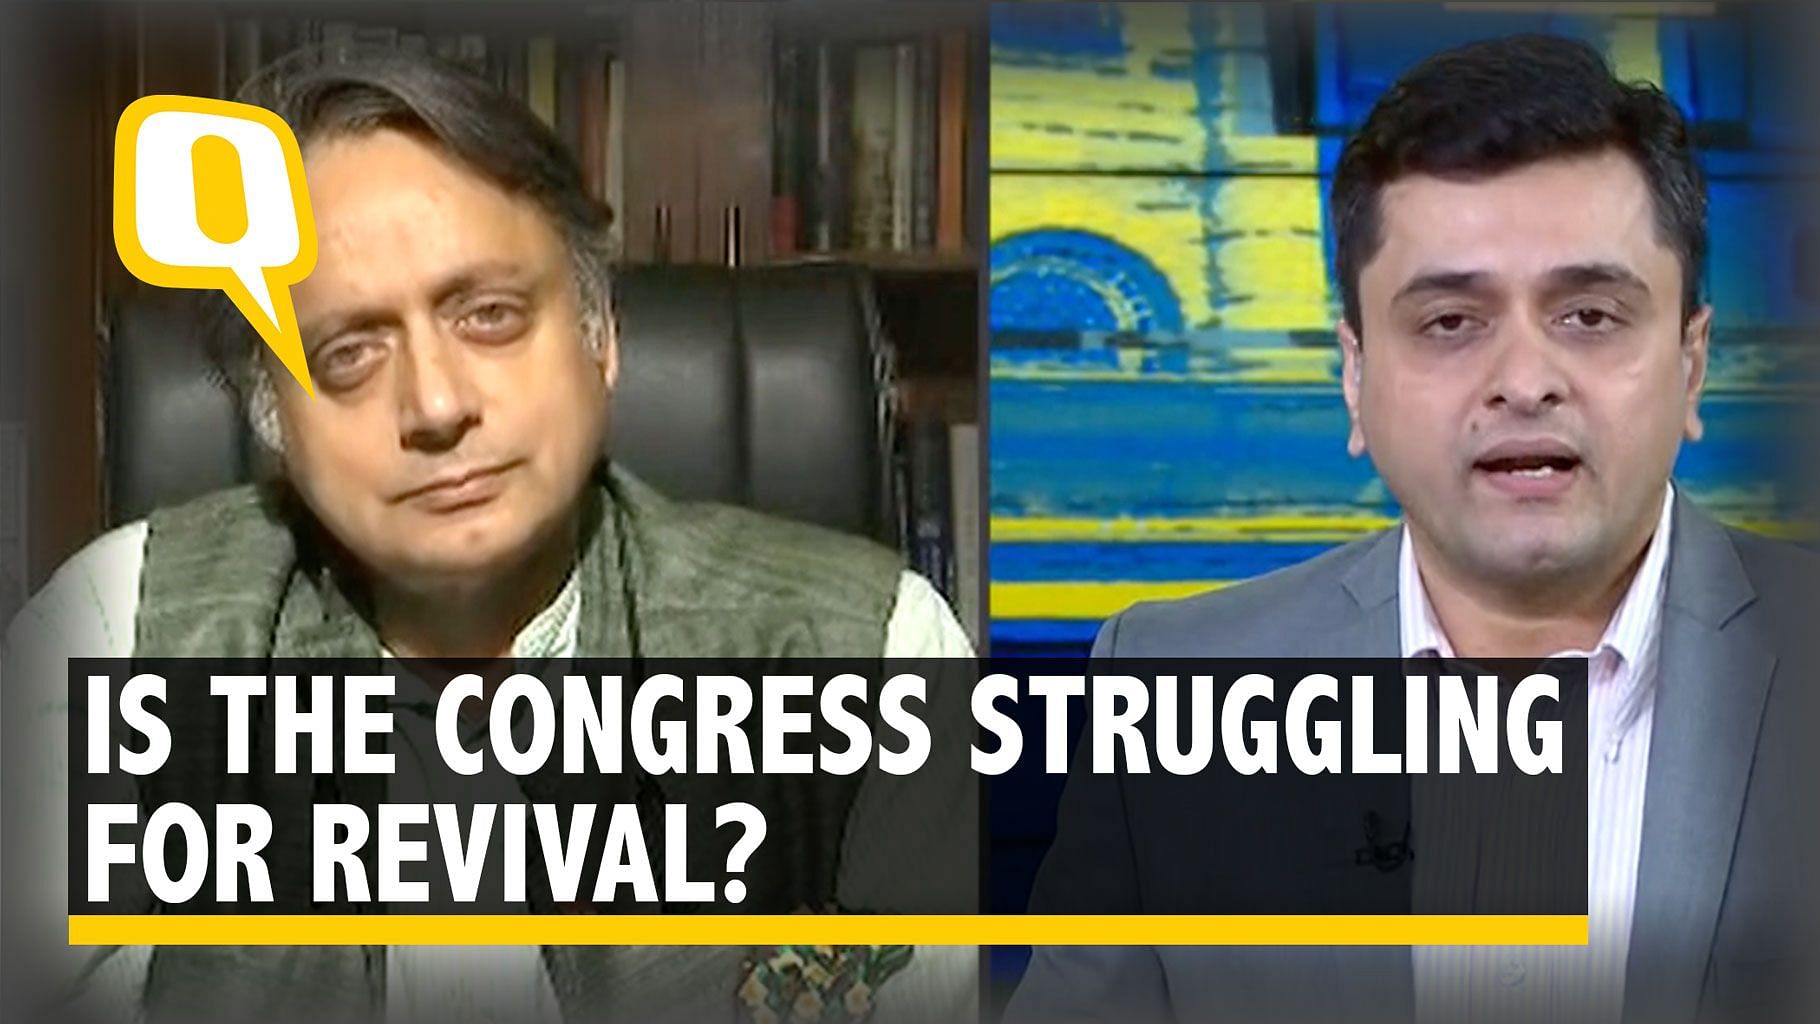 How can the Congress be revived and what is the way forward?